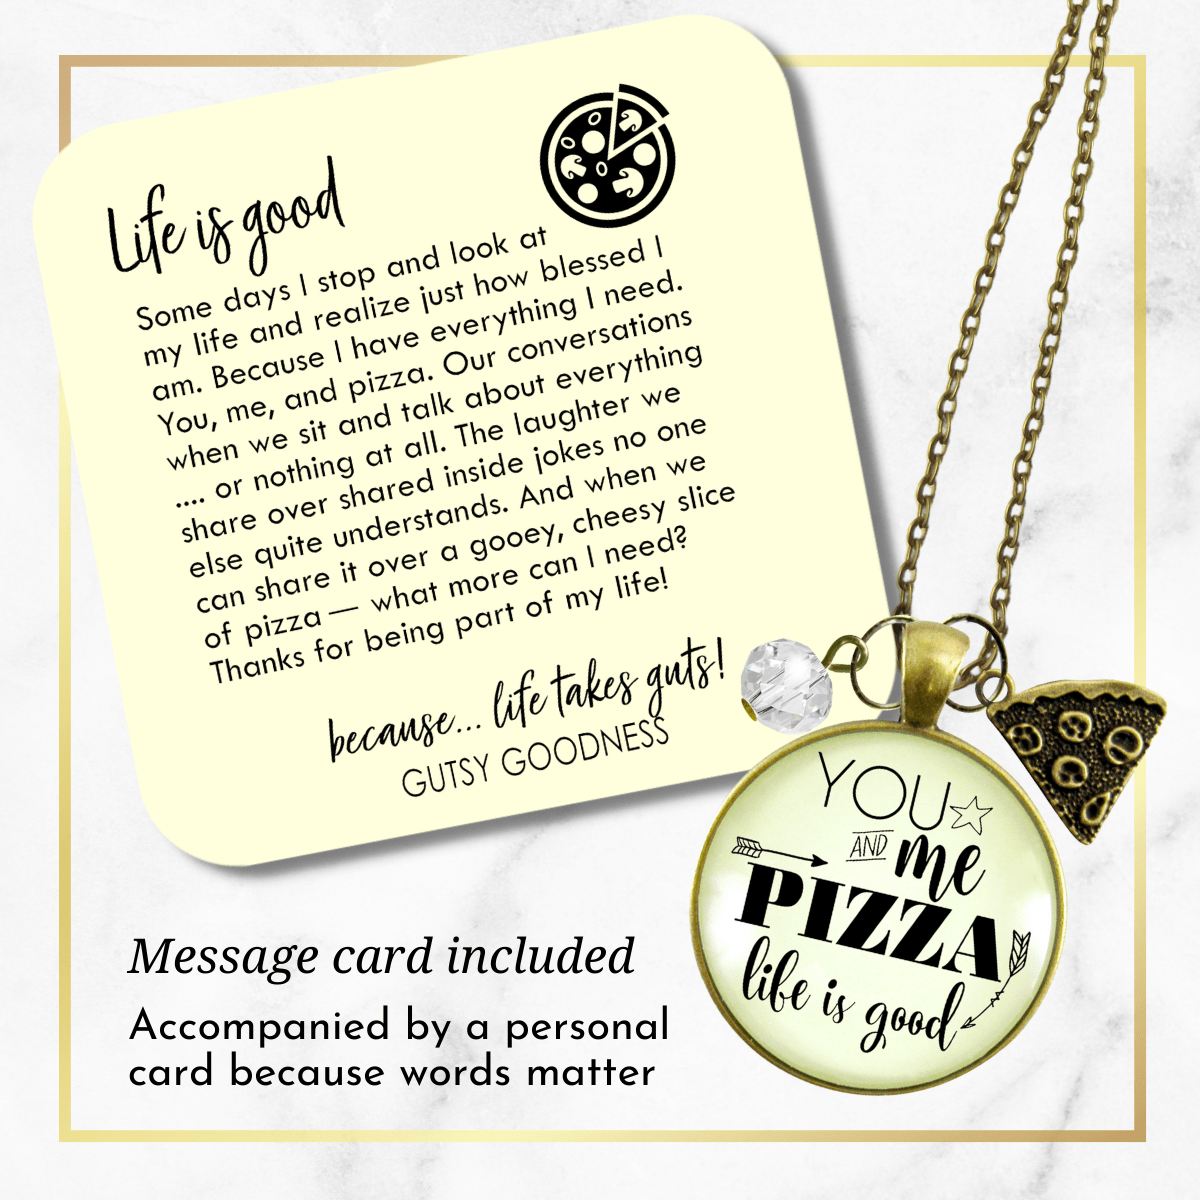 Gutsy Goodness Pizza Necklace You Me Pizza Life is Good Friendship Charm - Gutsy Goodness Handmade Jewelry;Pizza Necklace You Me Pizza Life Is Good Friendship Charm - Gutsy Goodness Handmade Jewelry Gifts